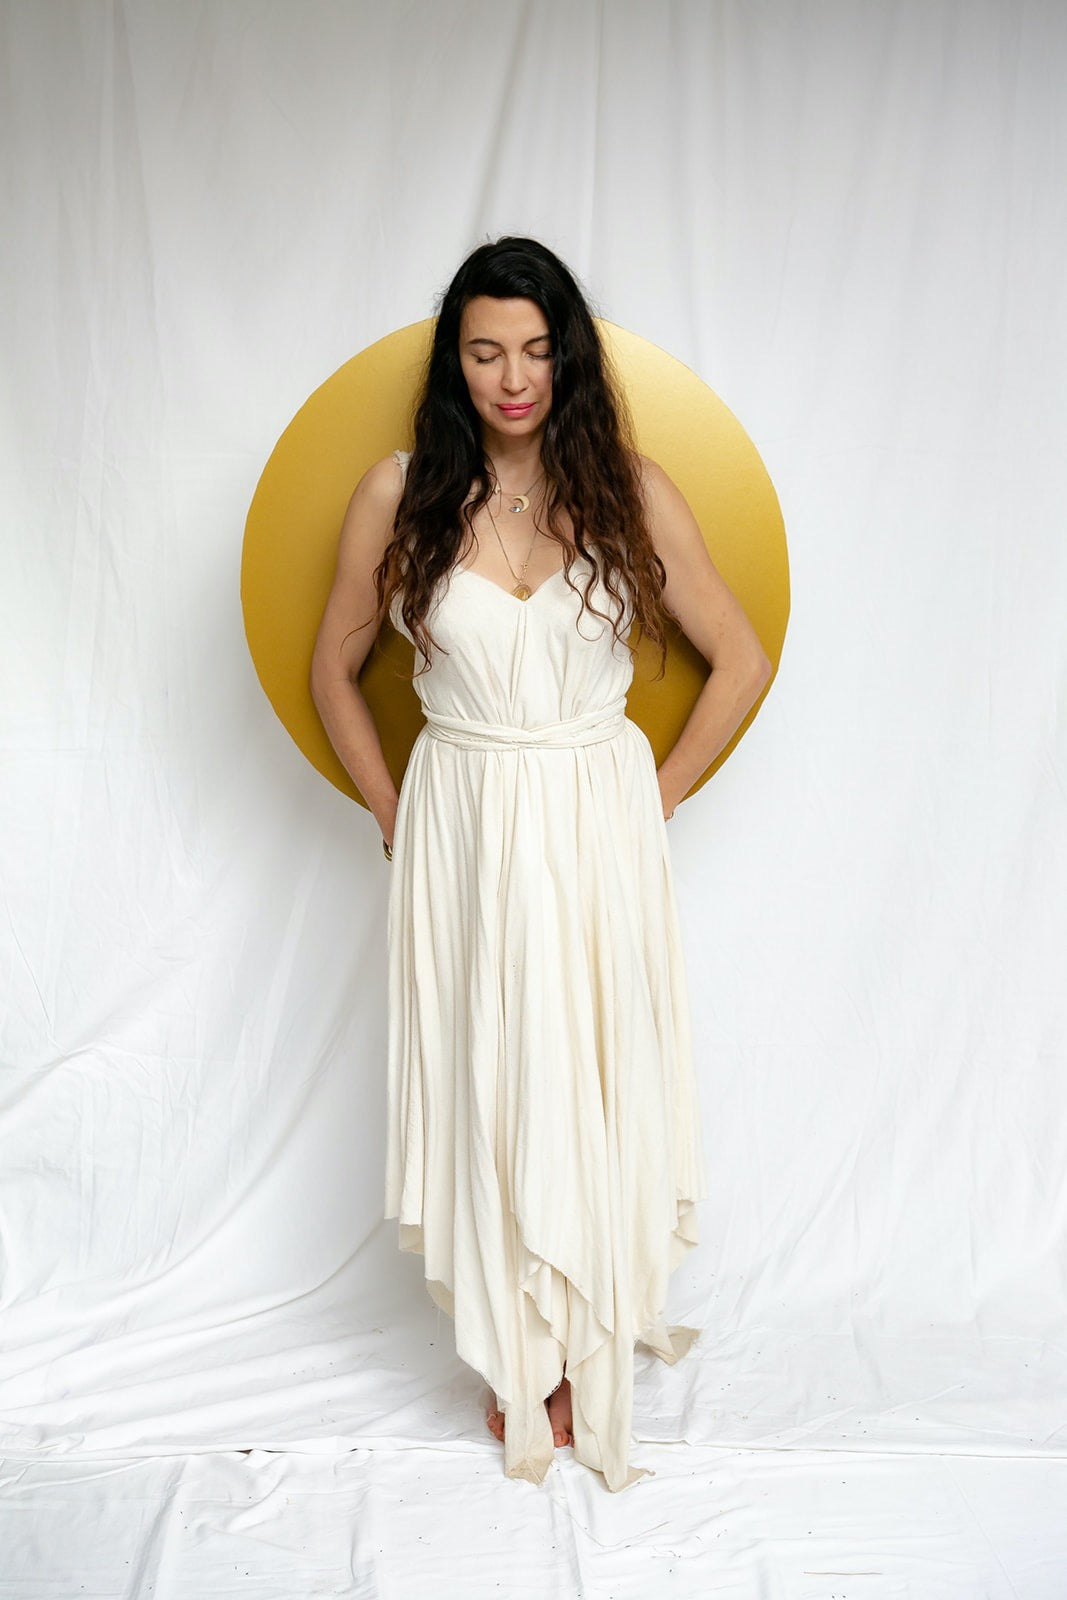 Madison's Muses: Meet Shiva Rose, Earth Goddess and the Founder of Shiva Rose Beauty